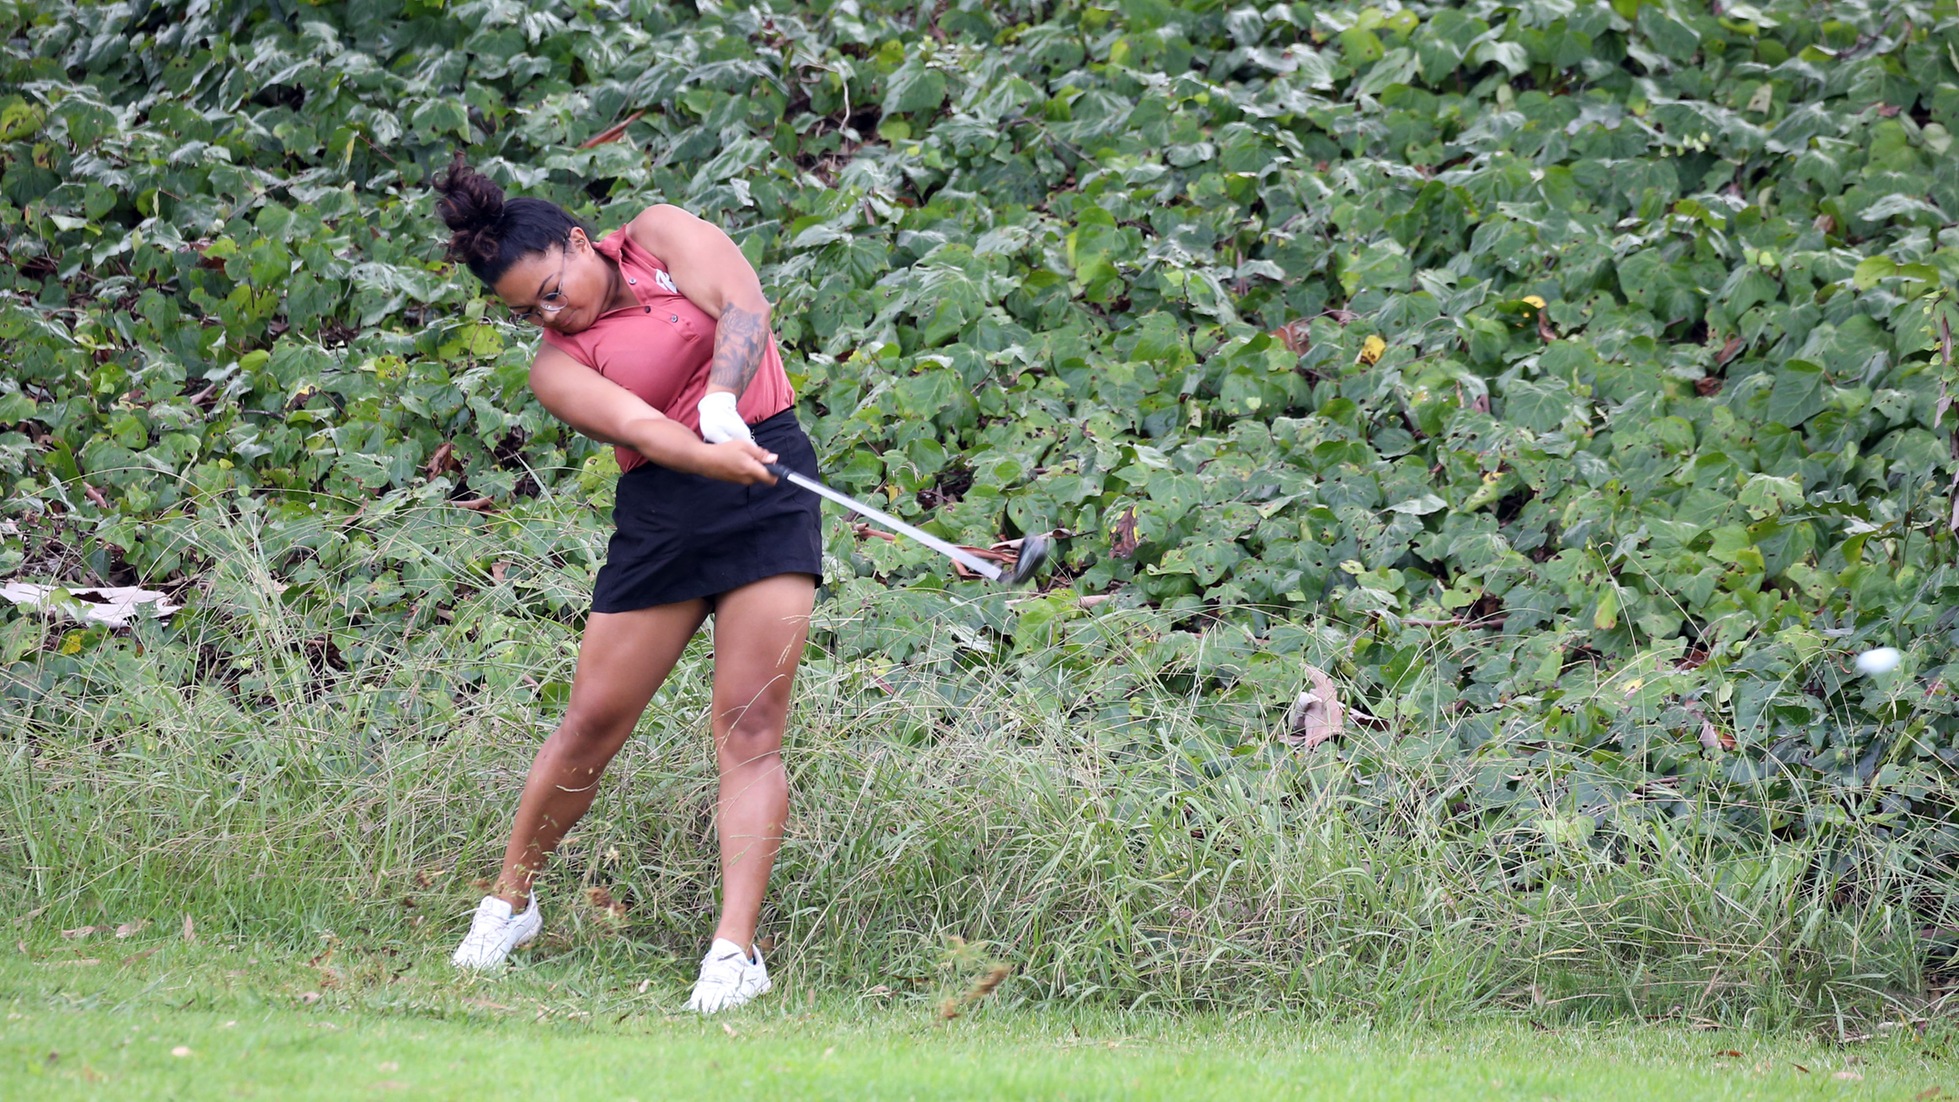 Golf finished in sixth at Singing Hills